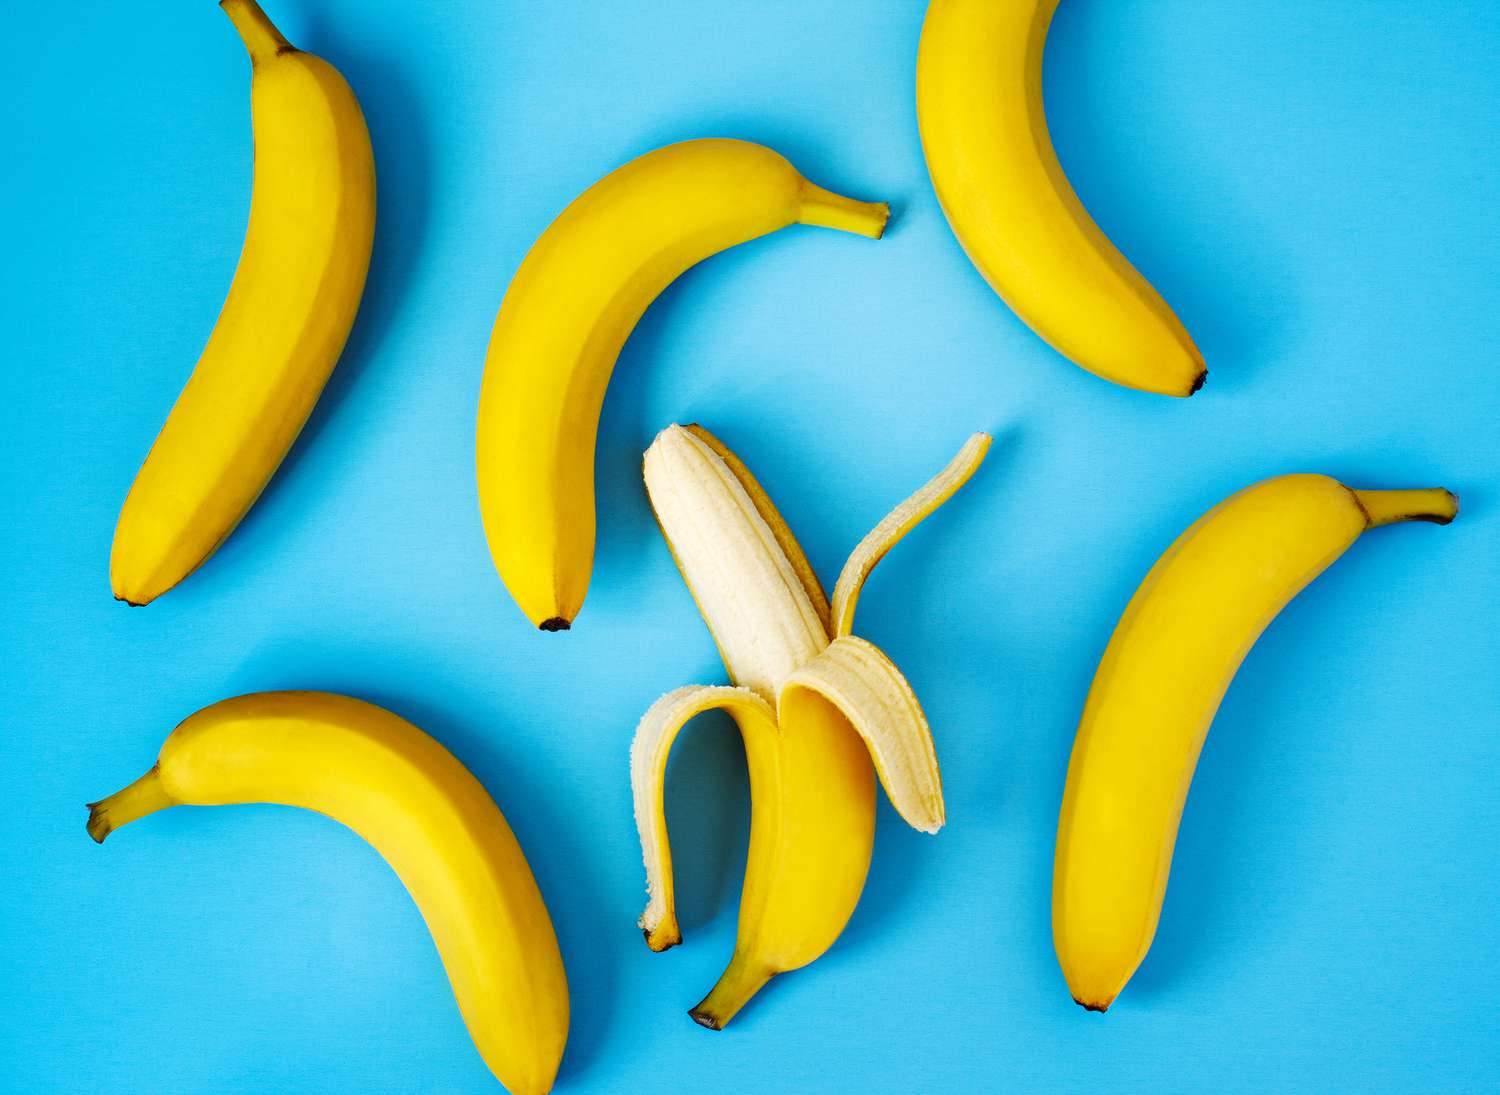 Six bananas, one peeled, on a bright blue background